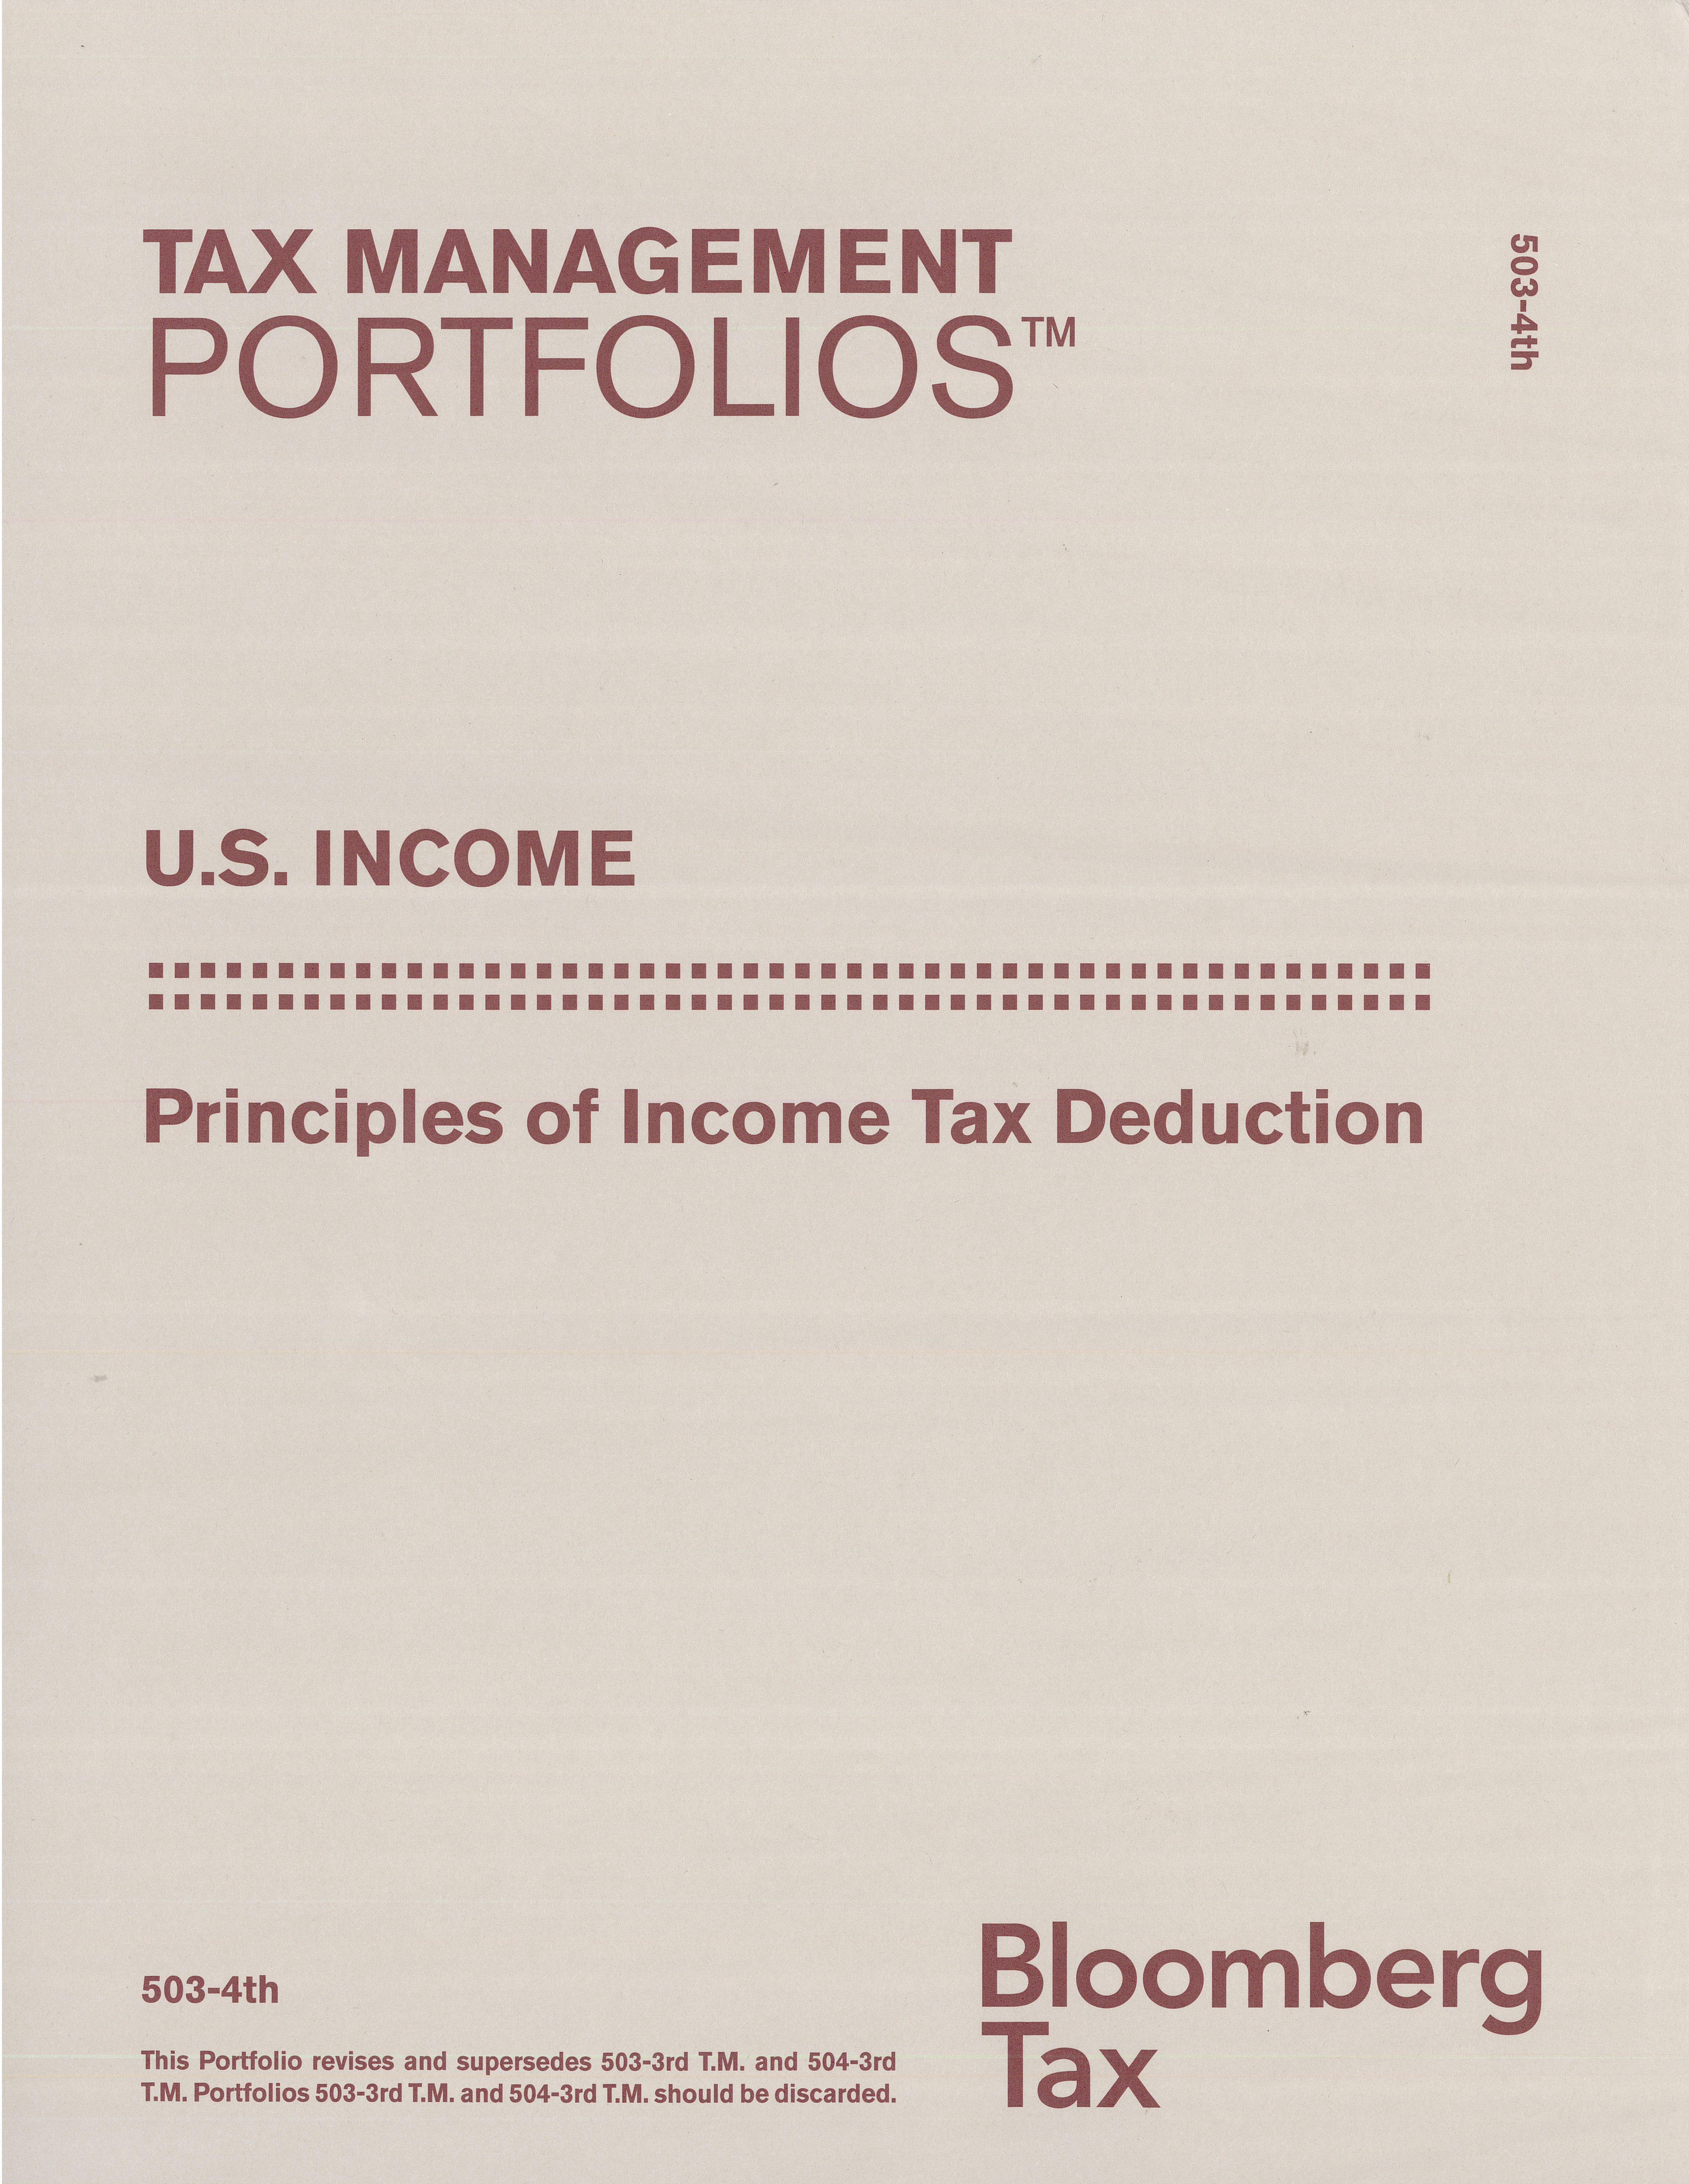 Principles of income tax deduction cover